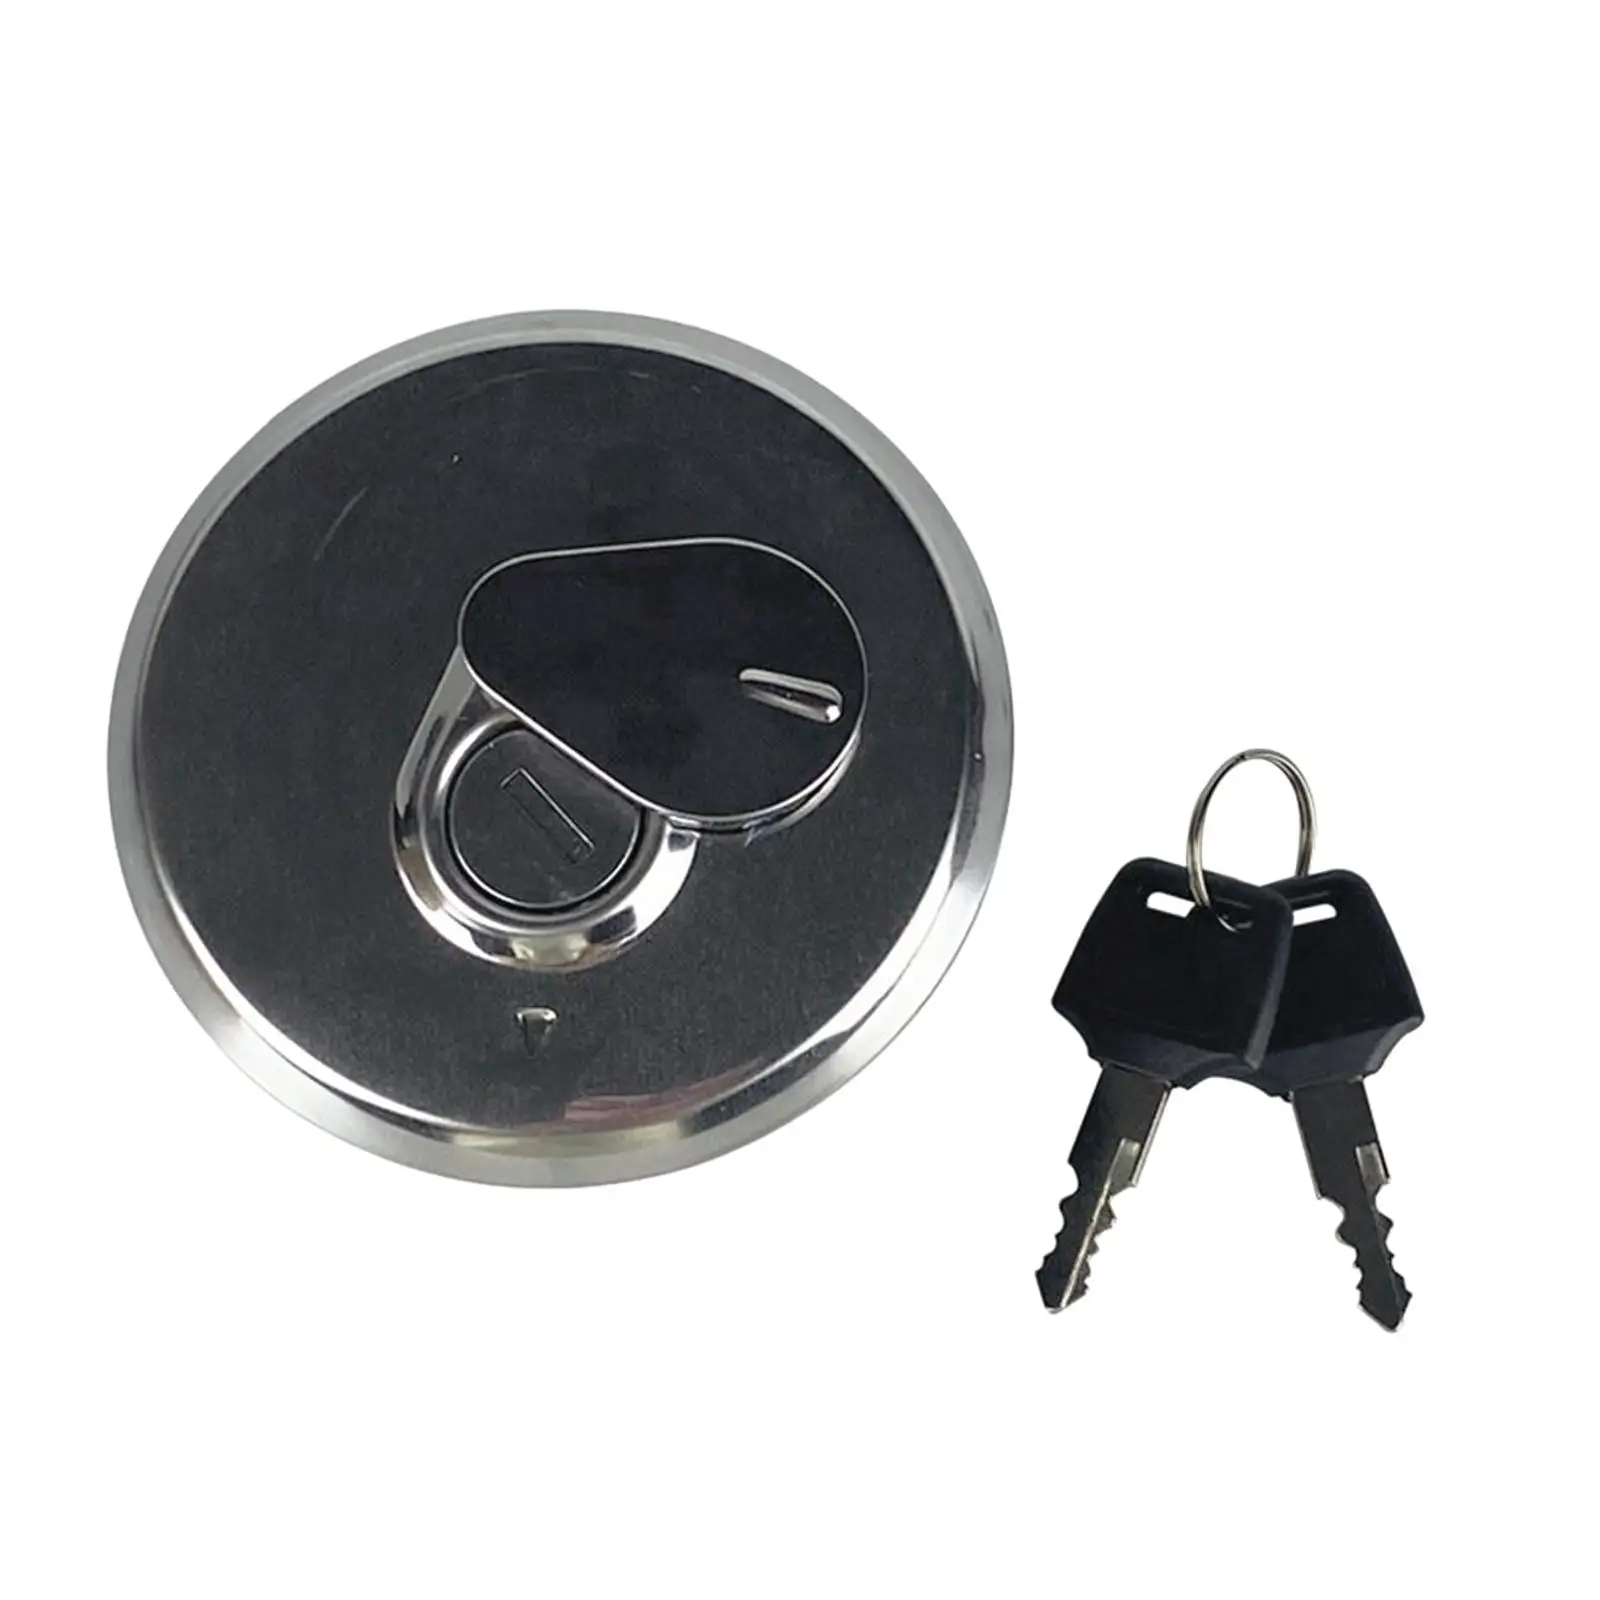 Motorcycle Fuel Gas Tank Cap Cover, with 2 Keys for Suzuki Gn125 Accessories